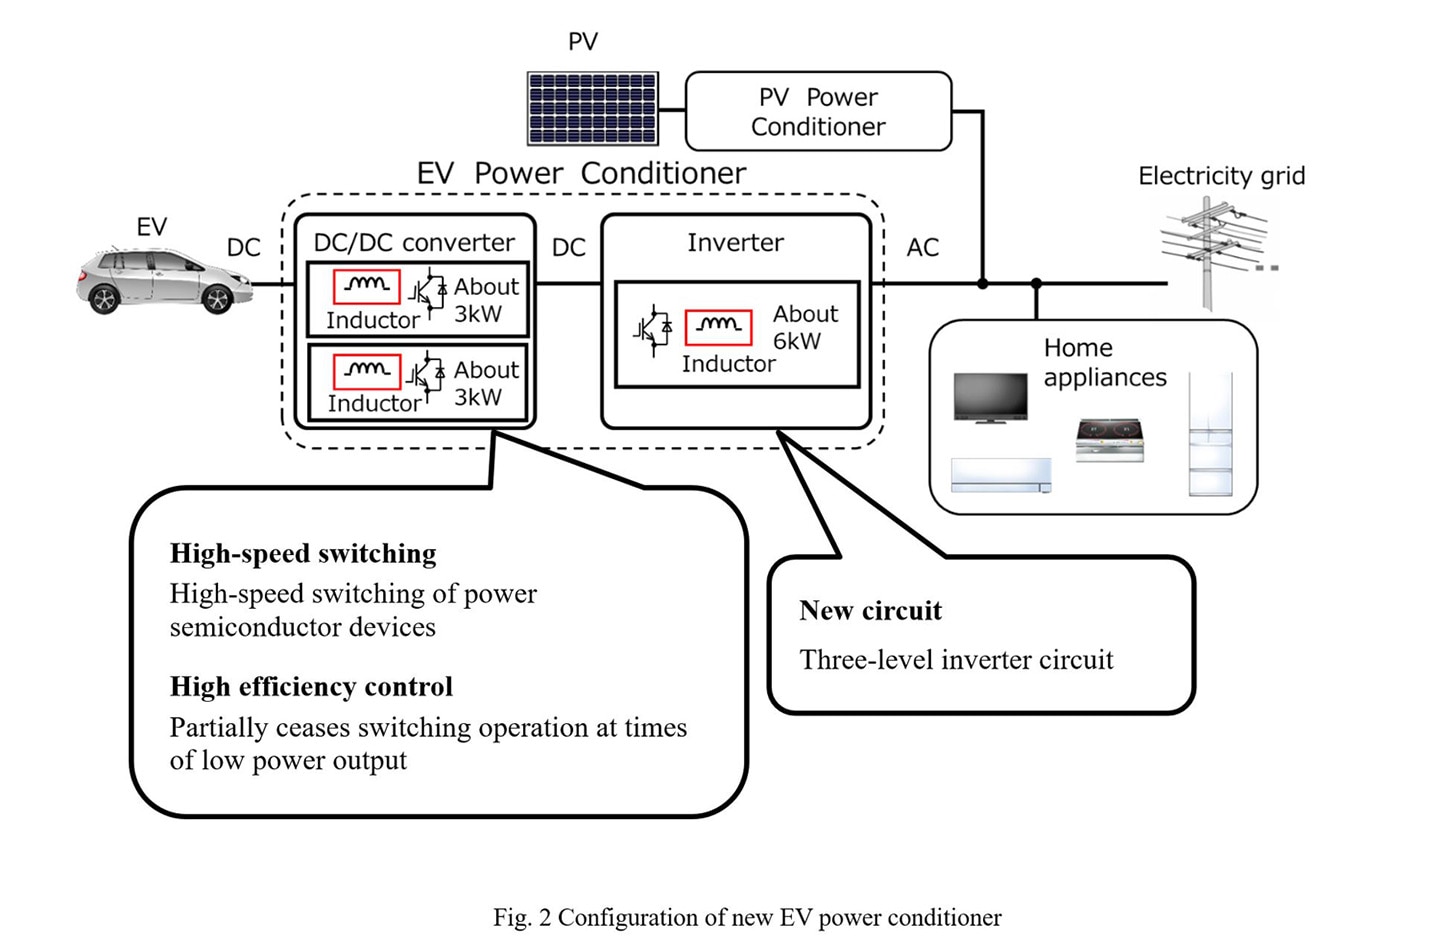 Fig. 2 Configuration of new EV power conditioner